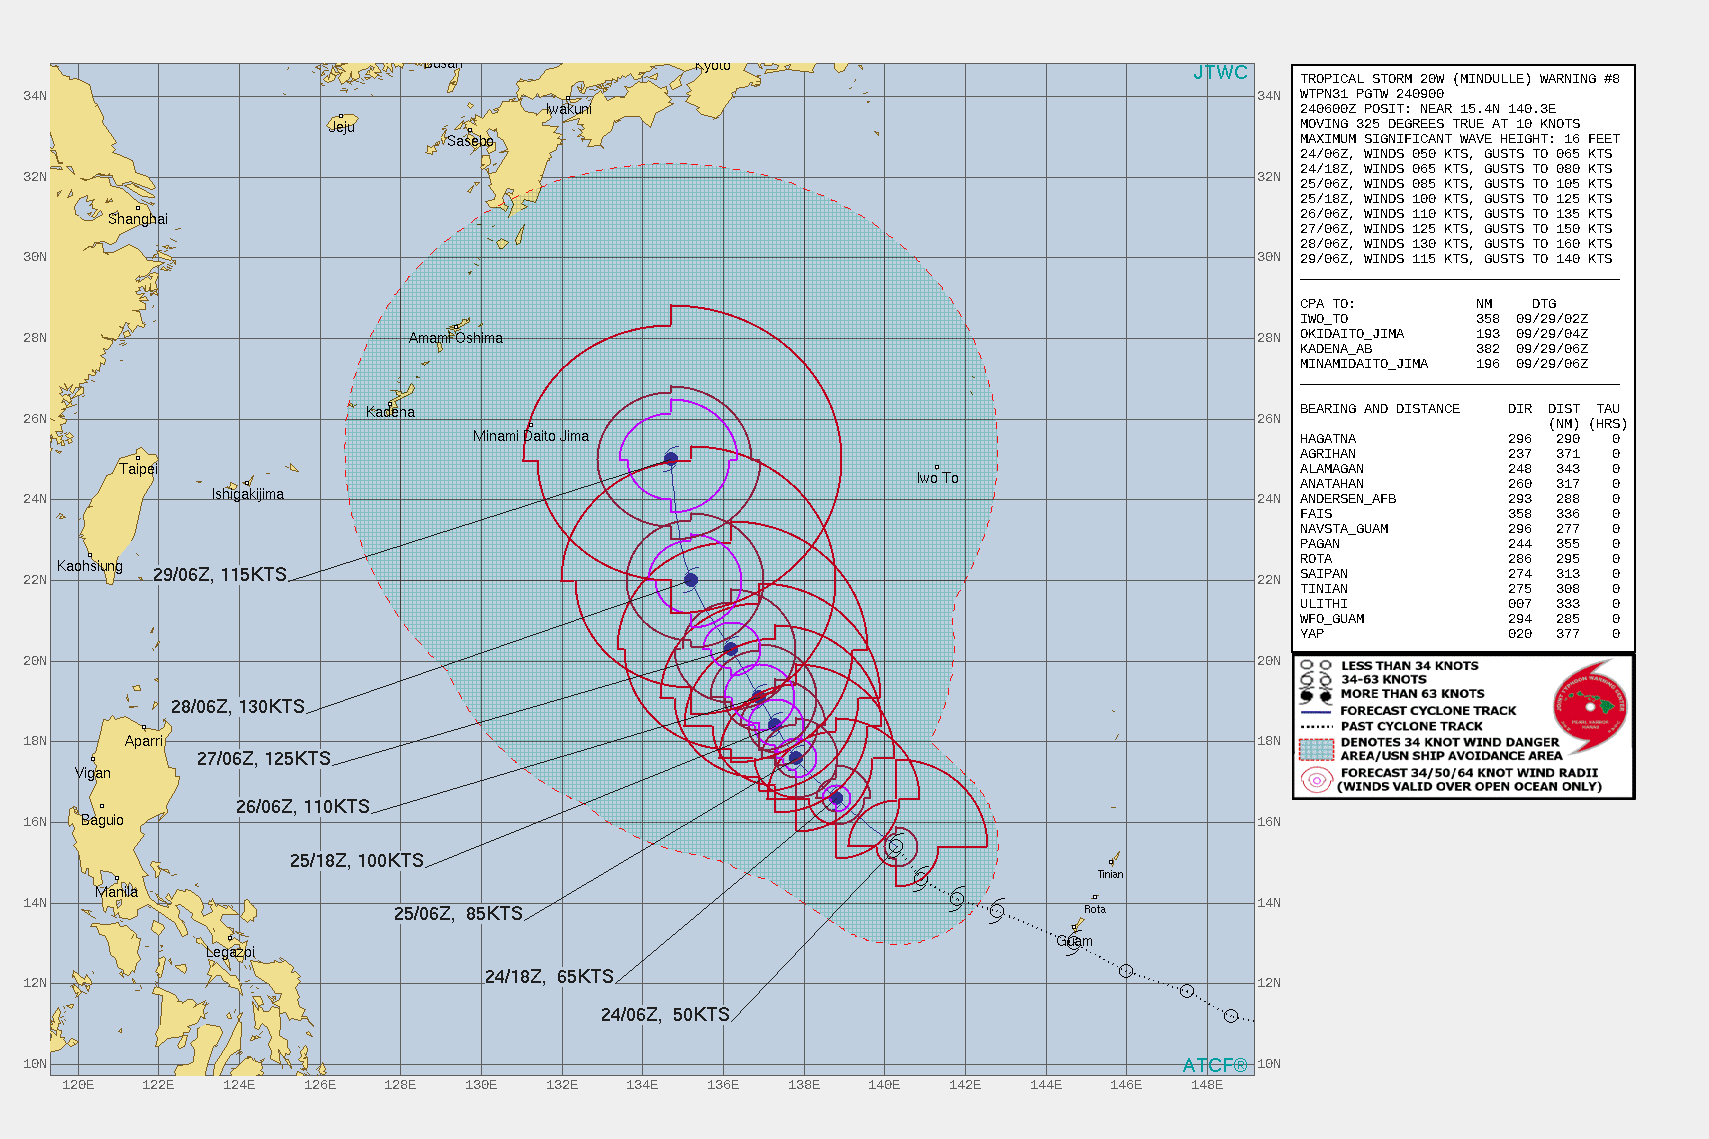 SIGNIFICANT FORECAST CHANGES: THERE ARE NO SIGNIFICANT CHANGES TO THE FORECAST FROM THE PREVIOUS WARNING.  FORECAST DISCUSSION: TS 20W WILL GENERALLY CONTINUE ON ITS CURRENT TRACK SOUTHWEST OF THE SUBTROPICAL RIDGE UP TO 96H. AFTER WHICH POINT IT WILL APPROACH THE RIDGE AXIS AROUND 120H AS IT BEGINS A NORTHWARD TRACK. THE CURRENT FAVORABLE ENVIRONMENT IS EXPECTED TO SUSTAIN AS IT FUELS RAPID INTENSIFICATION TO 125 KNOTS/CAT 4 BY 72H, WITH A PEAK OF 130KNOTS/CAT 4 "SUPER TYPHOON" BY 96H. DECREASED UPPER LEVEL OUTFLOW WILL BEGIN TO SLIGHTLY WEAKEN THE SYSTEM, DOWN TO 115KNOTS BY 120H.